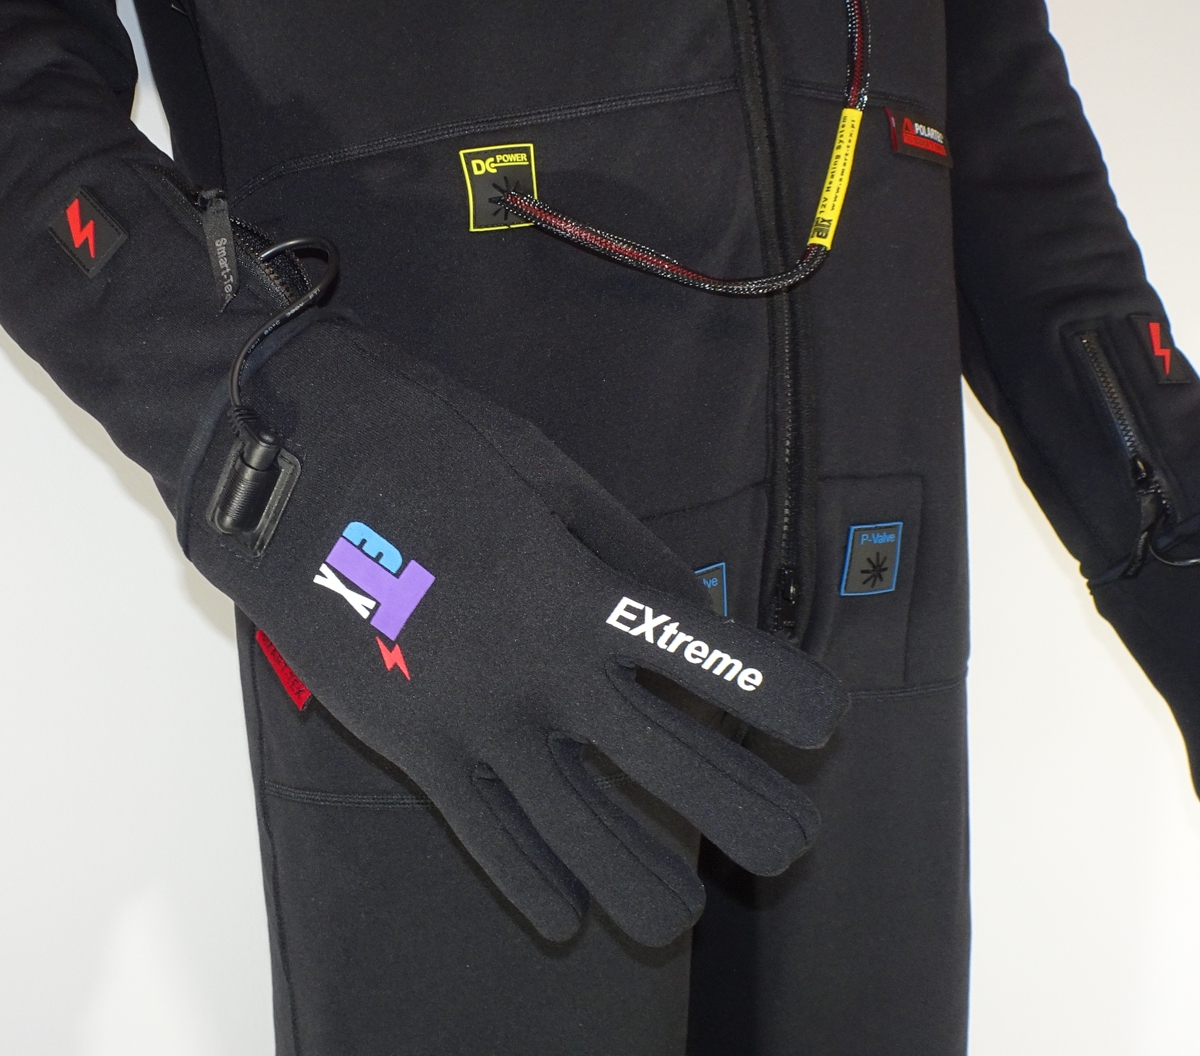 Extreme heated diving gloves with DC angle connector